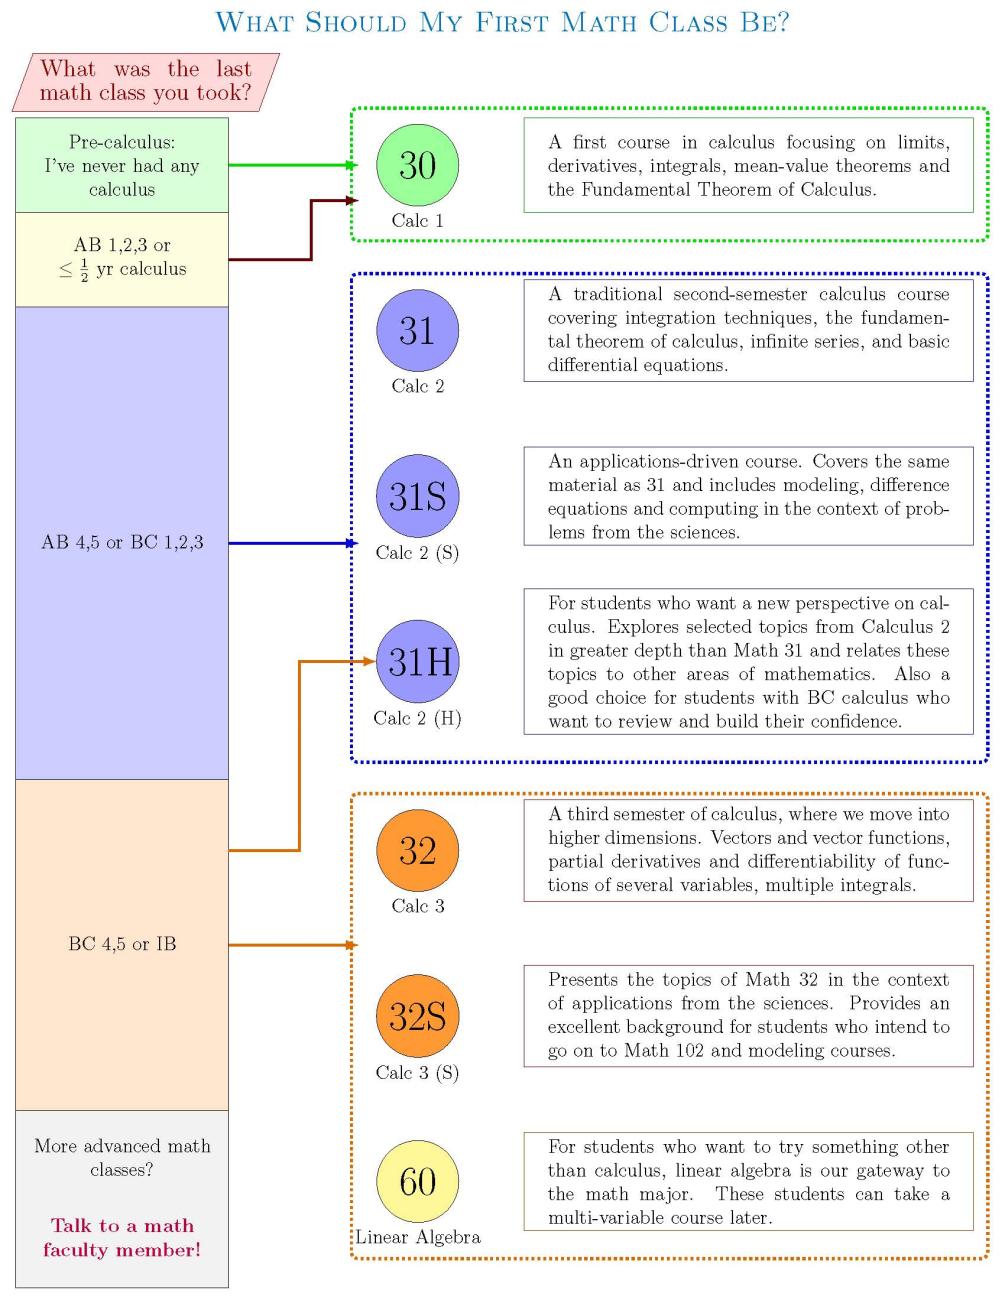 visual representation of math guidelines featured on this page